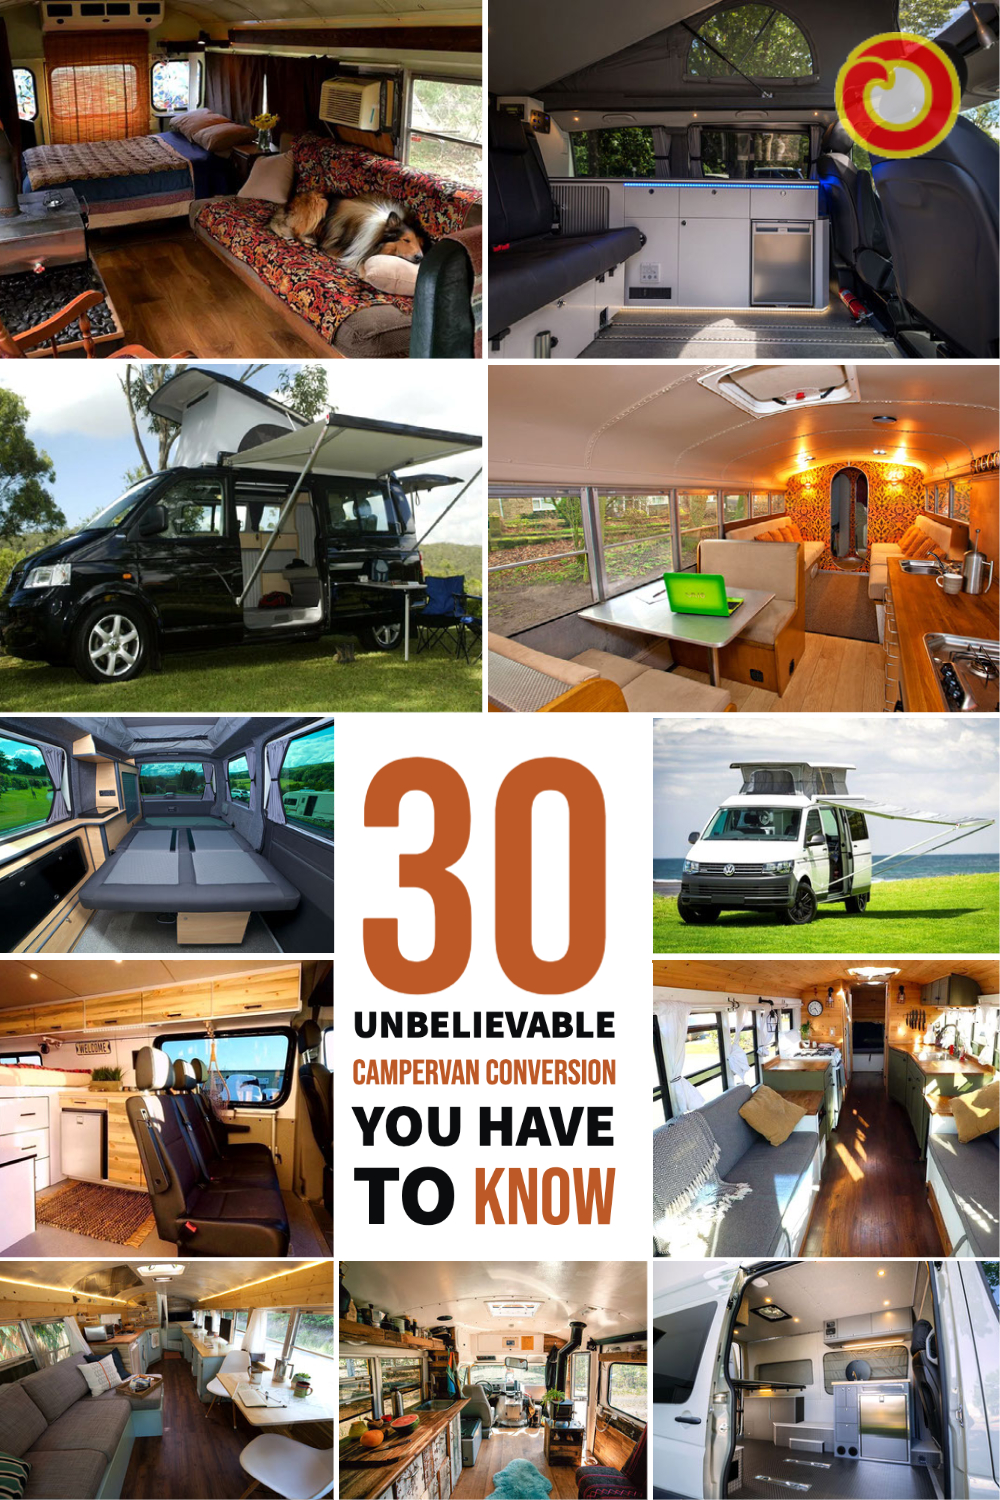 30 Unbelievable Campervan Conversion You Have To Know